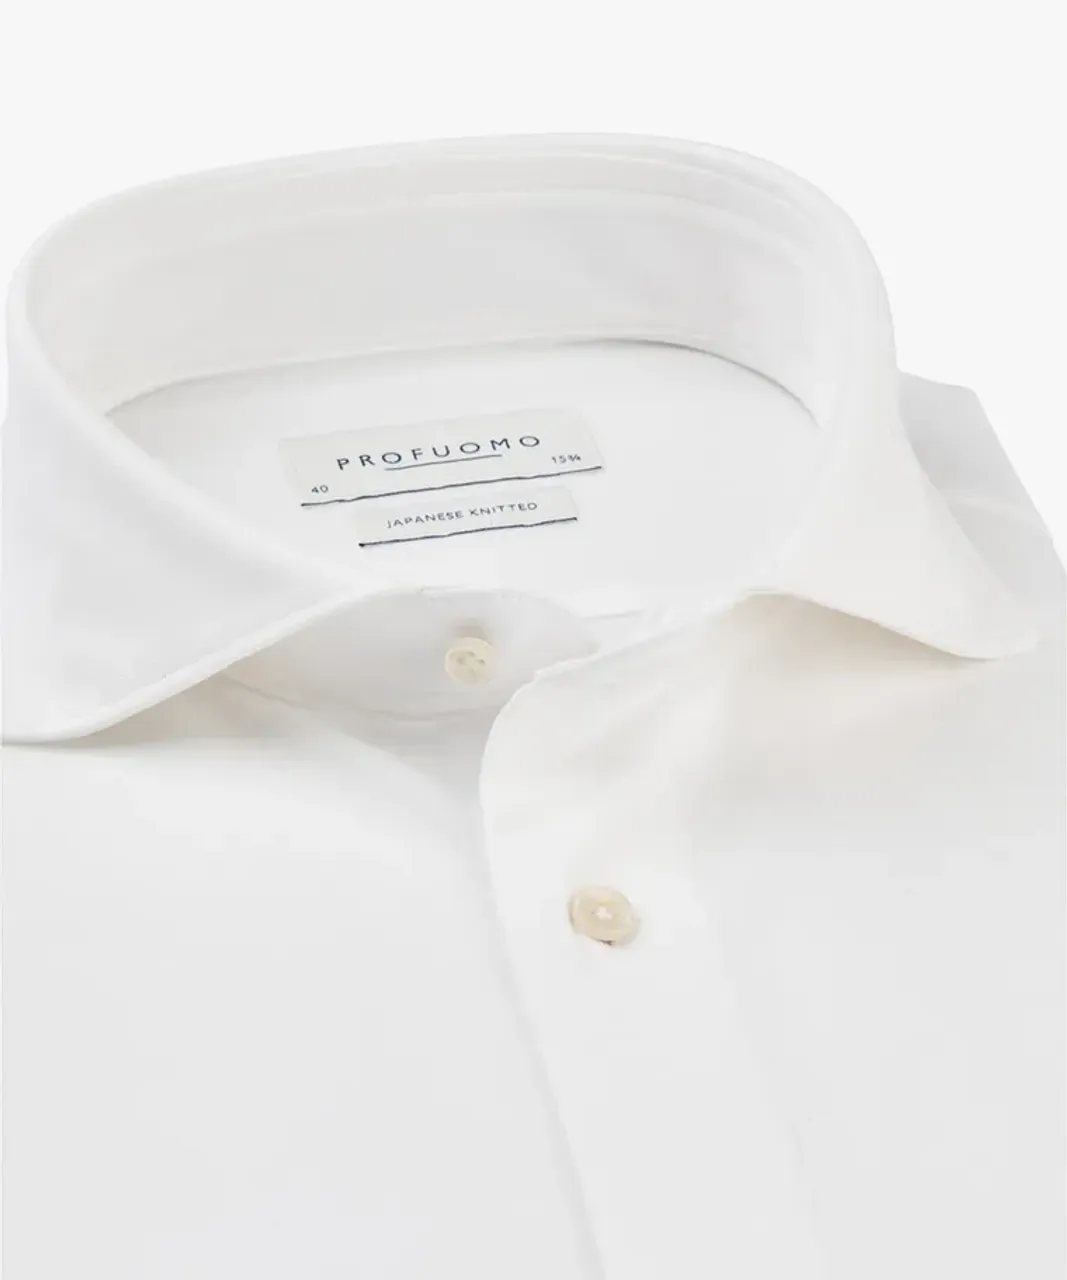 Profuomo Overhemd Japanese Knitted Shirt Wit   